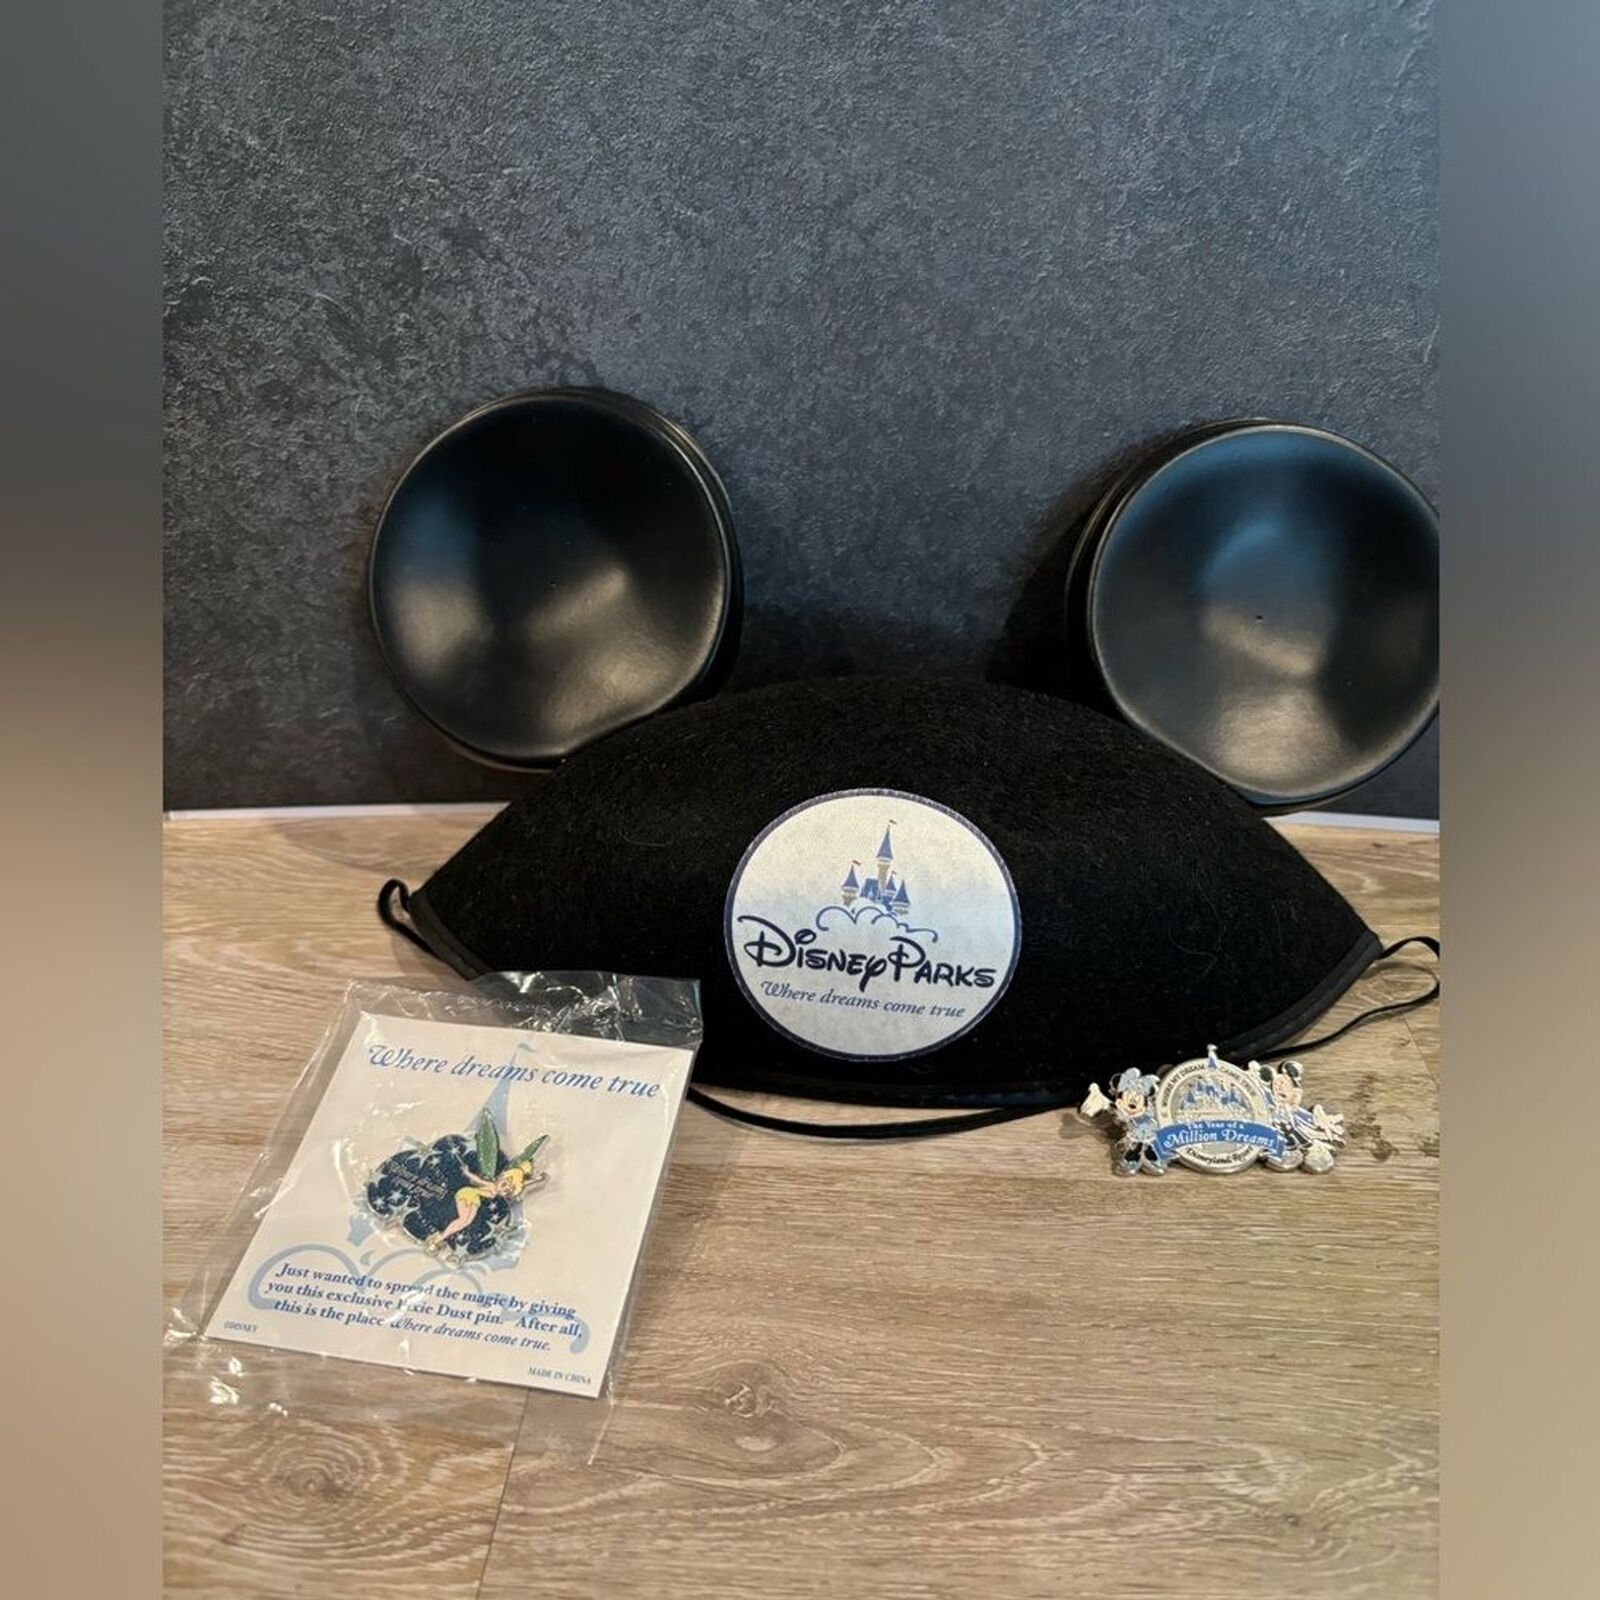 Disneyland “Where Dreams Come True” collection: Mouse Ears and 2 pins